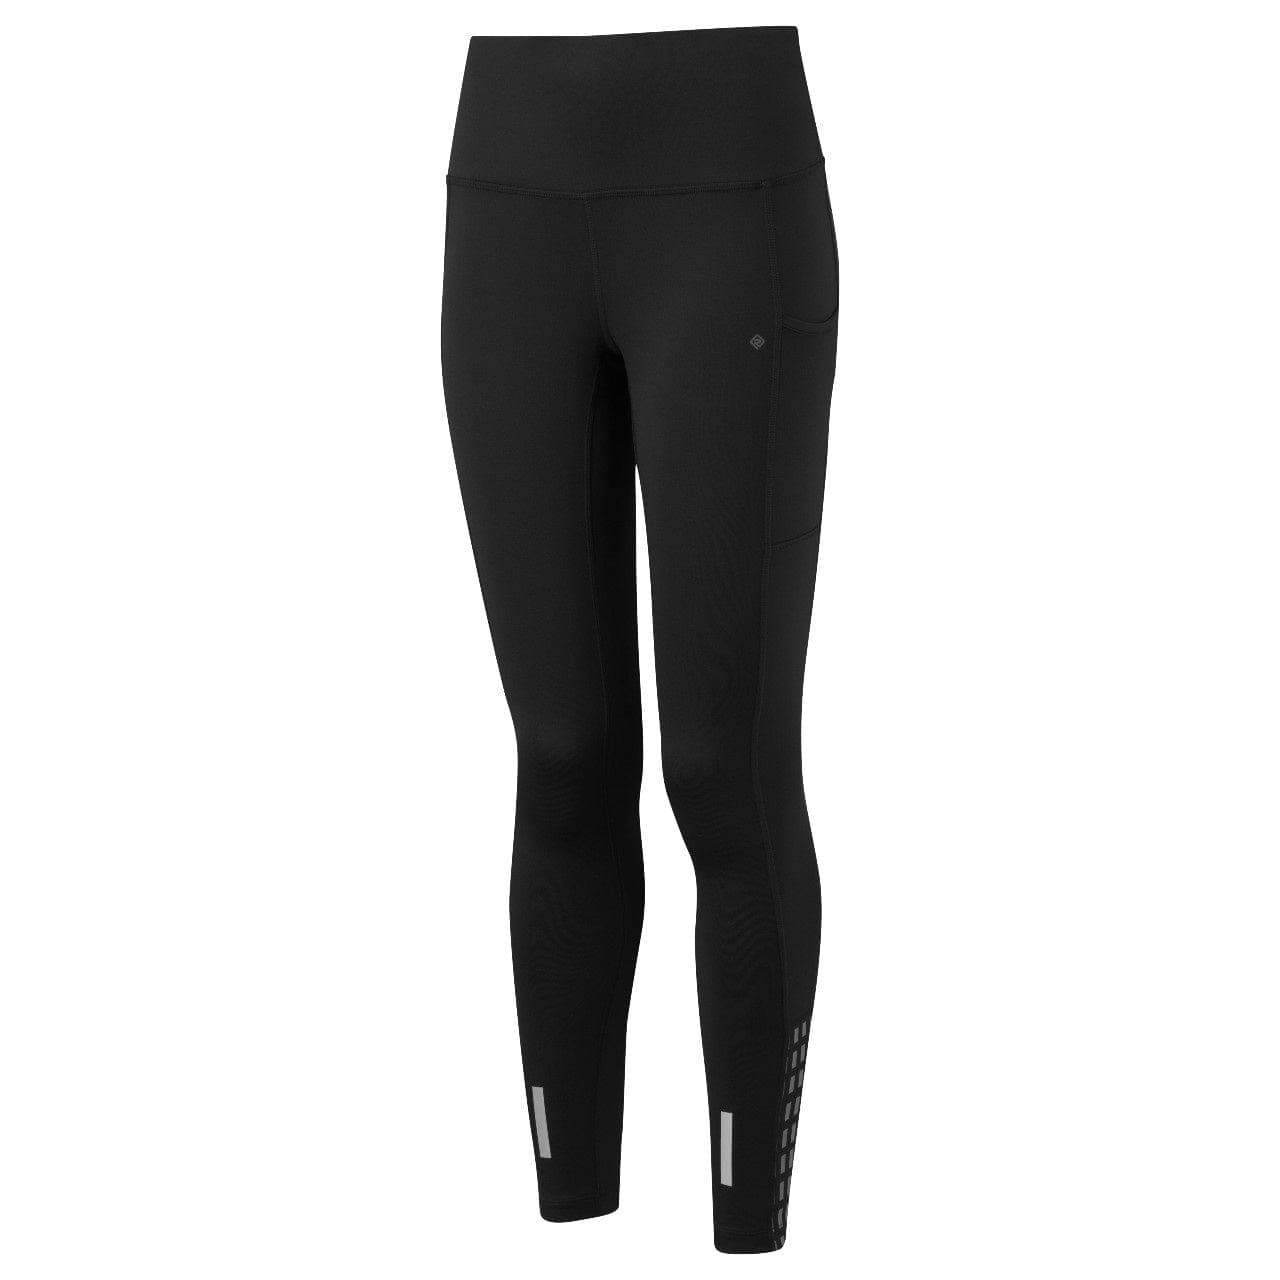 Ronhill Tech Afterhours Tight (Womens) - Black/Charcoal/Reflective